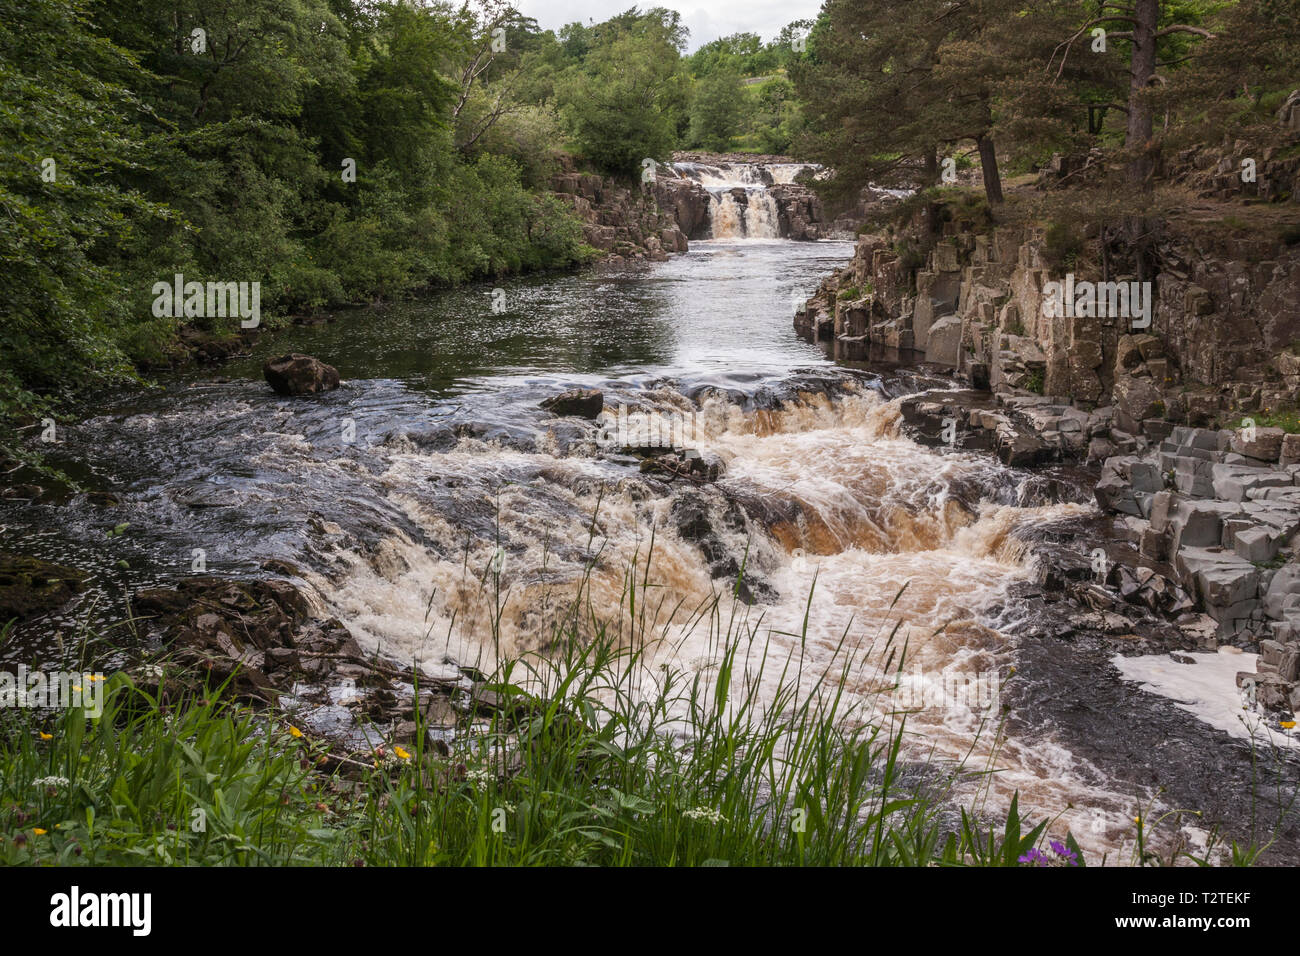 A scenic view of the Low Force waterfalls in Teesdale in north east Durham,England,UK Stock Photo